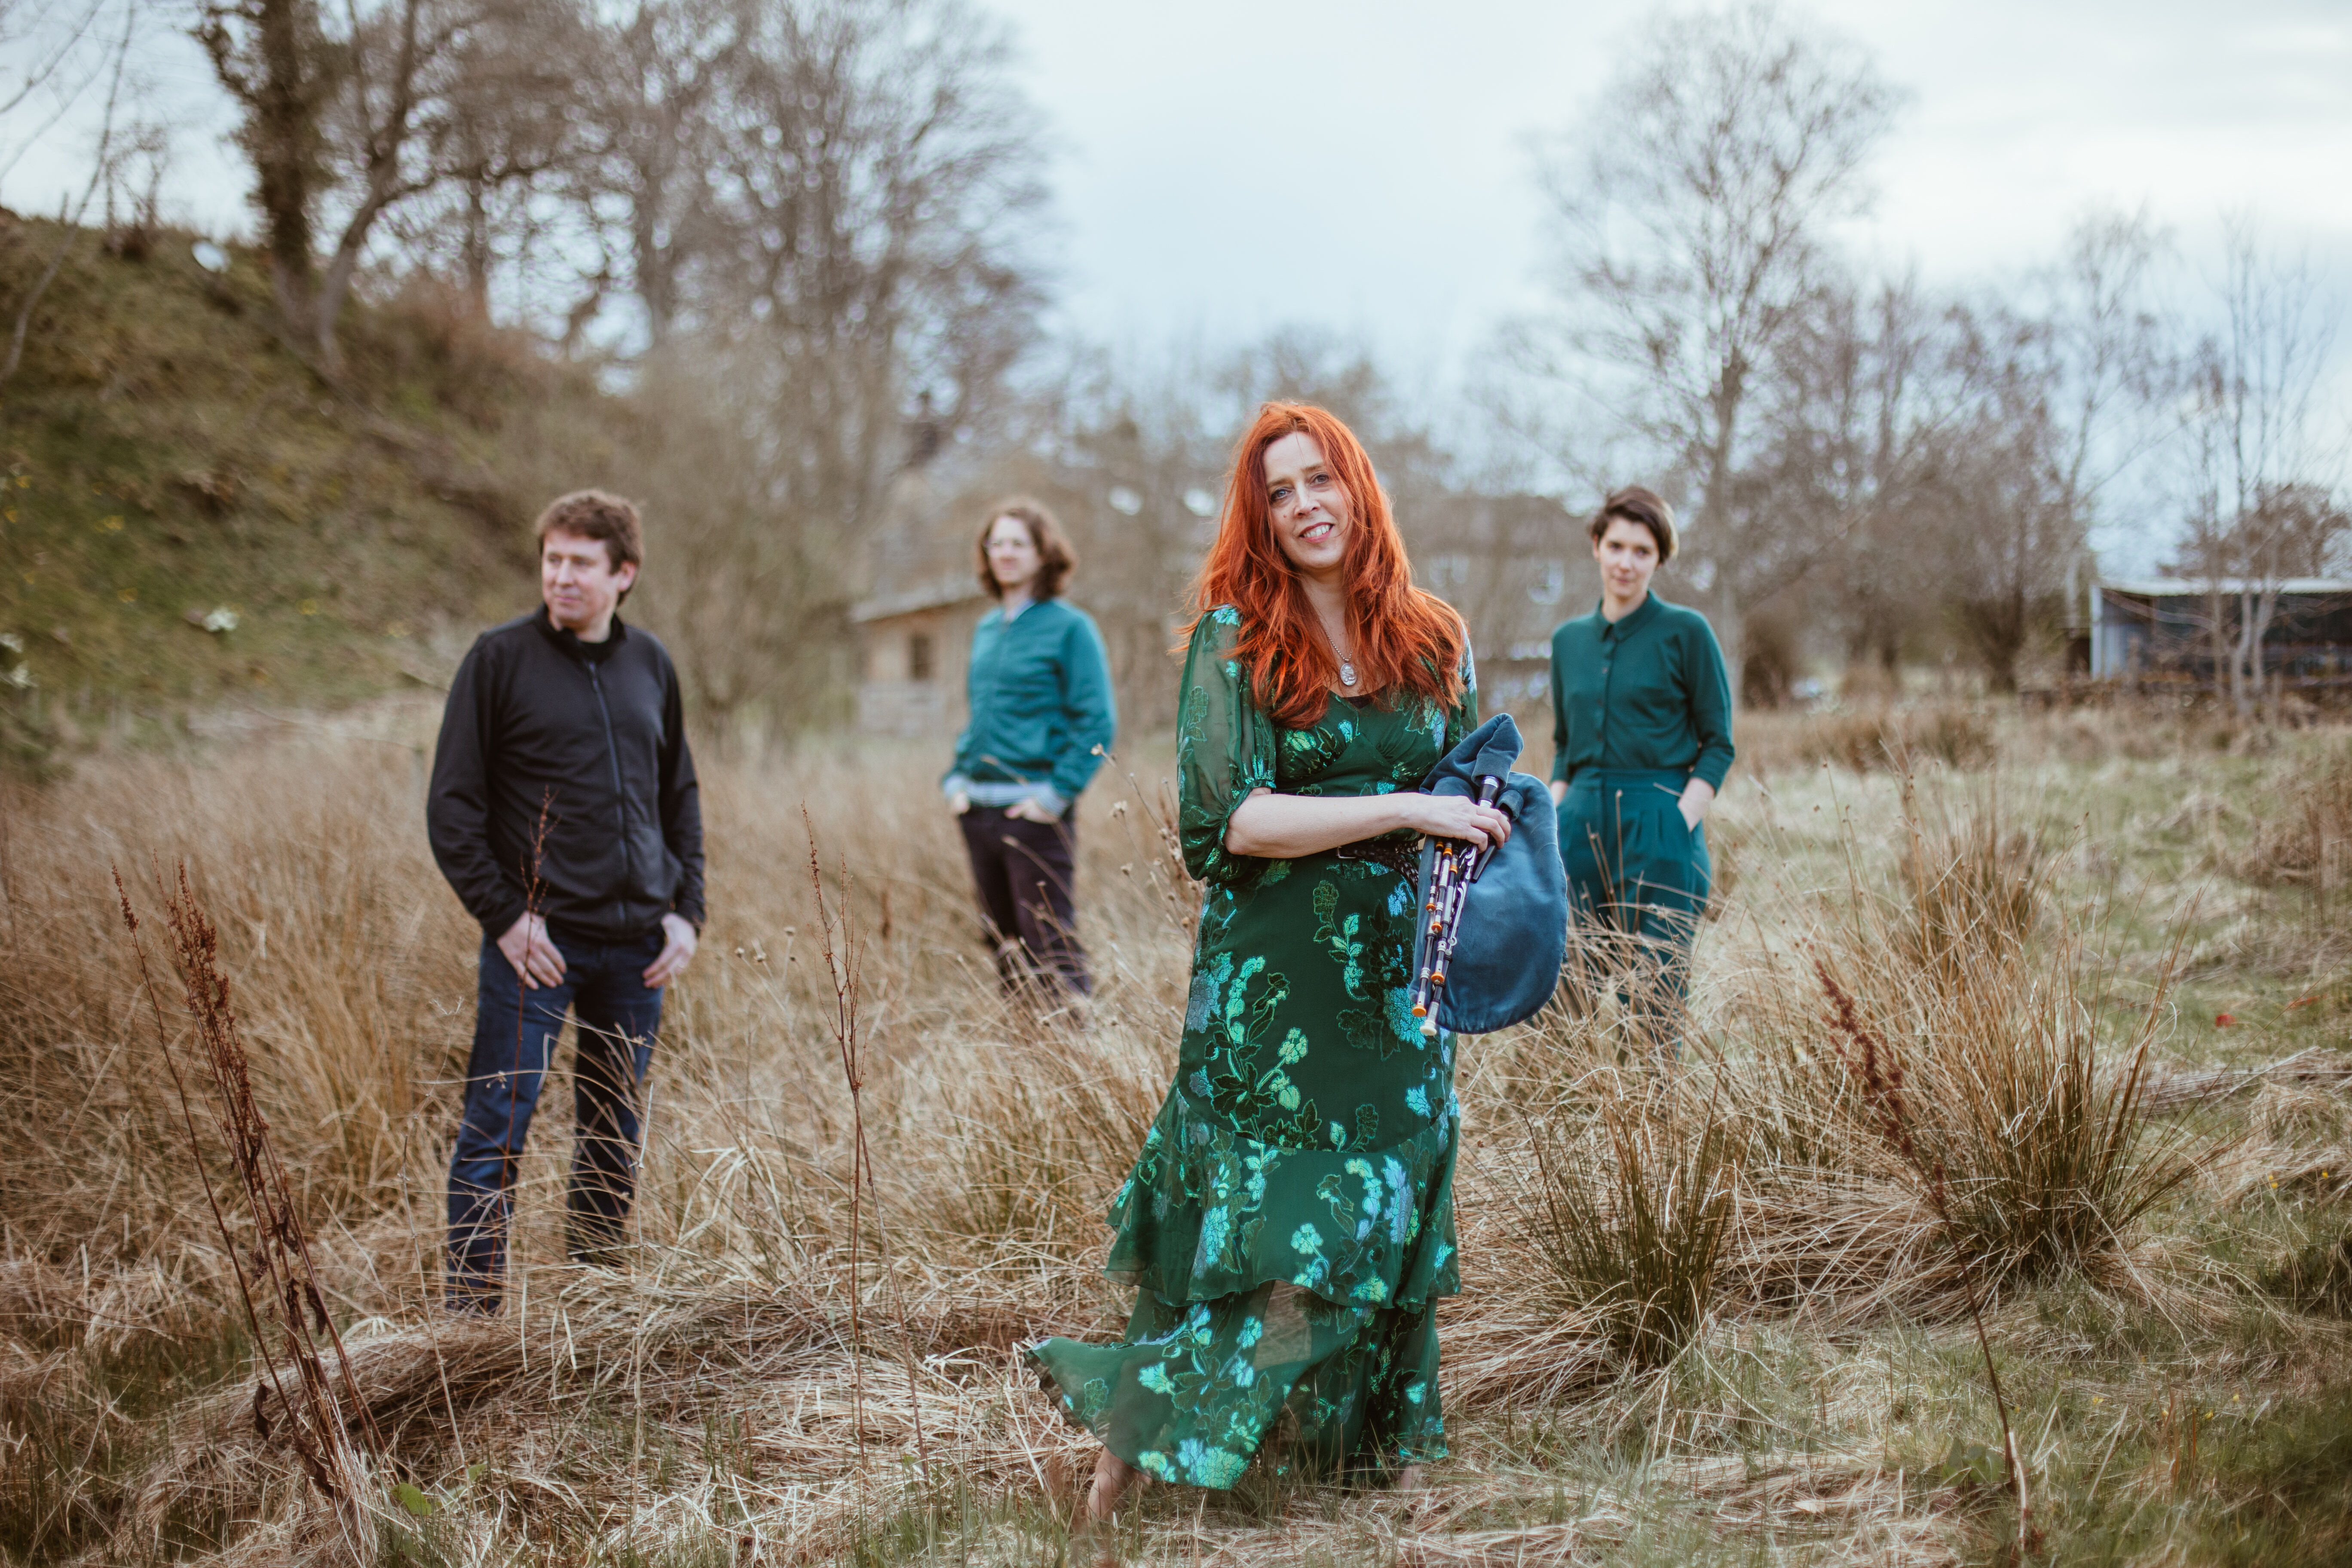 Image of Kathryn Tickell standing in a field wearing a long dark green dress with 3 other band member standing spaced out behind her looking in different directions